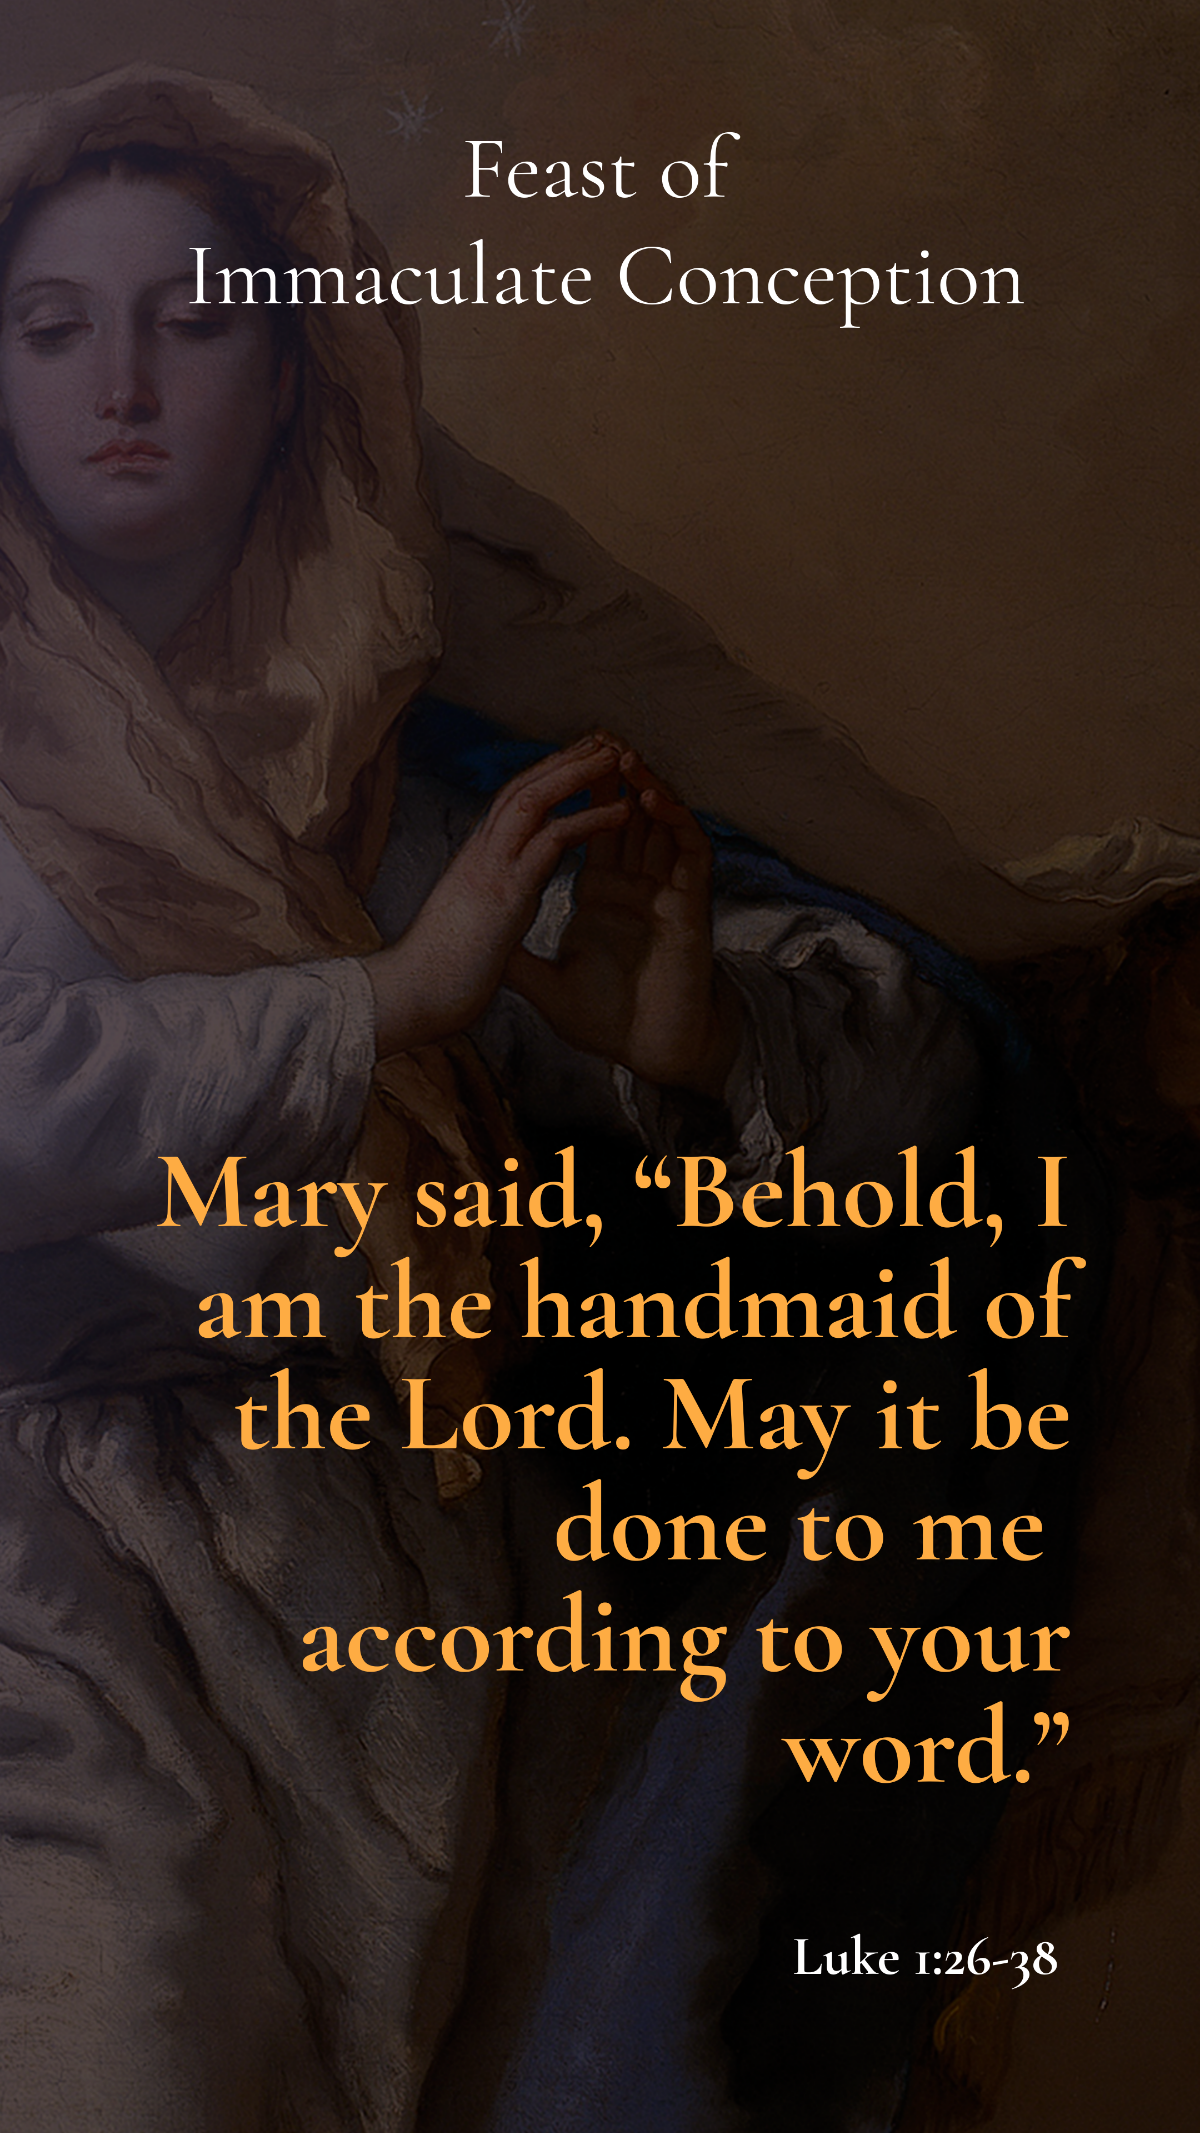 Free Simple Feast of the Immaculate Conception Quote Template